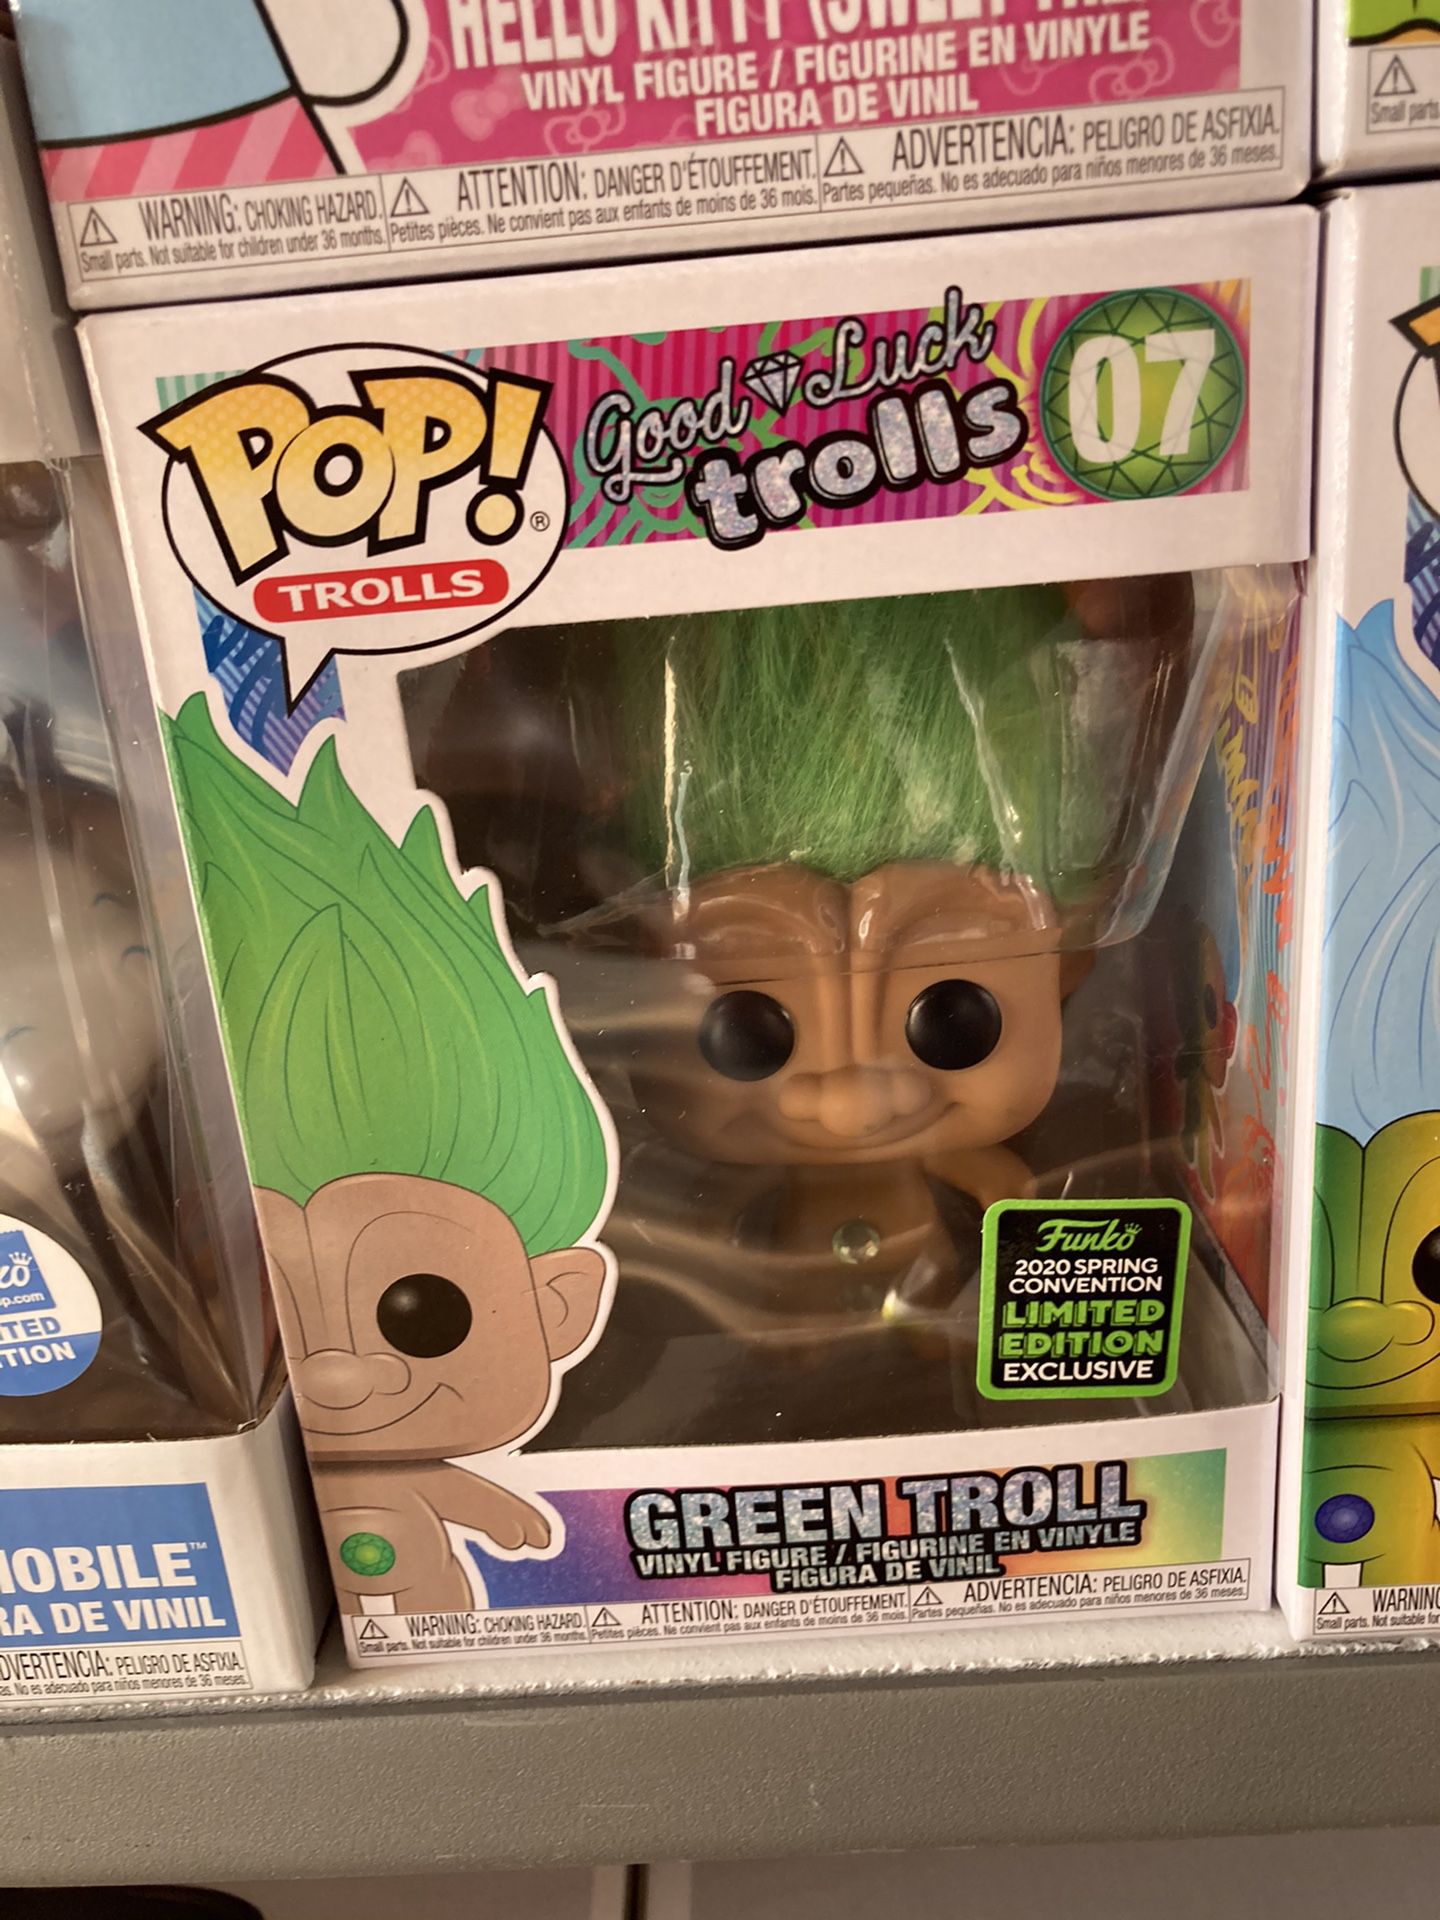 Good luck trolls green troll #7 2020 Spring Convention Limited Edition